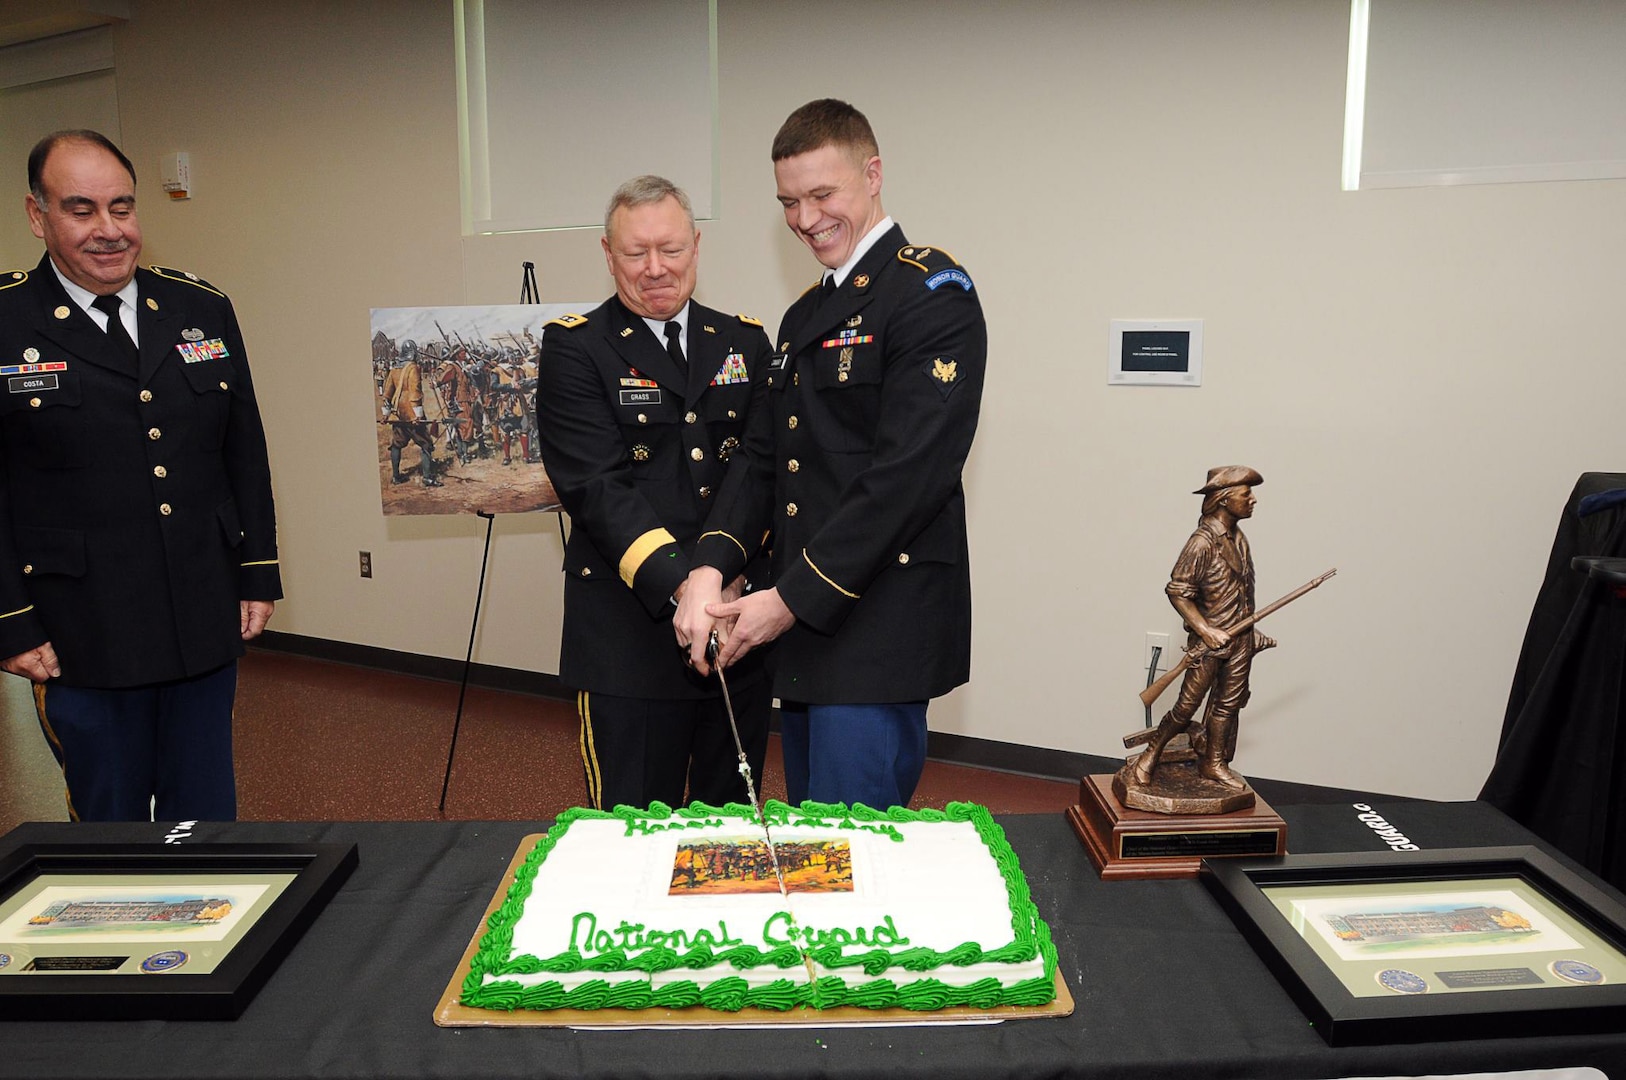 Gen. Frank Grass and Spc. Brendan Canary of the Massachusetts Army National Guard cut a cake celebrating the founding of the National Guard, Dec. 13, 2012. Command Sgt. Maj. David Costa looks on during the ceremony.